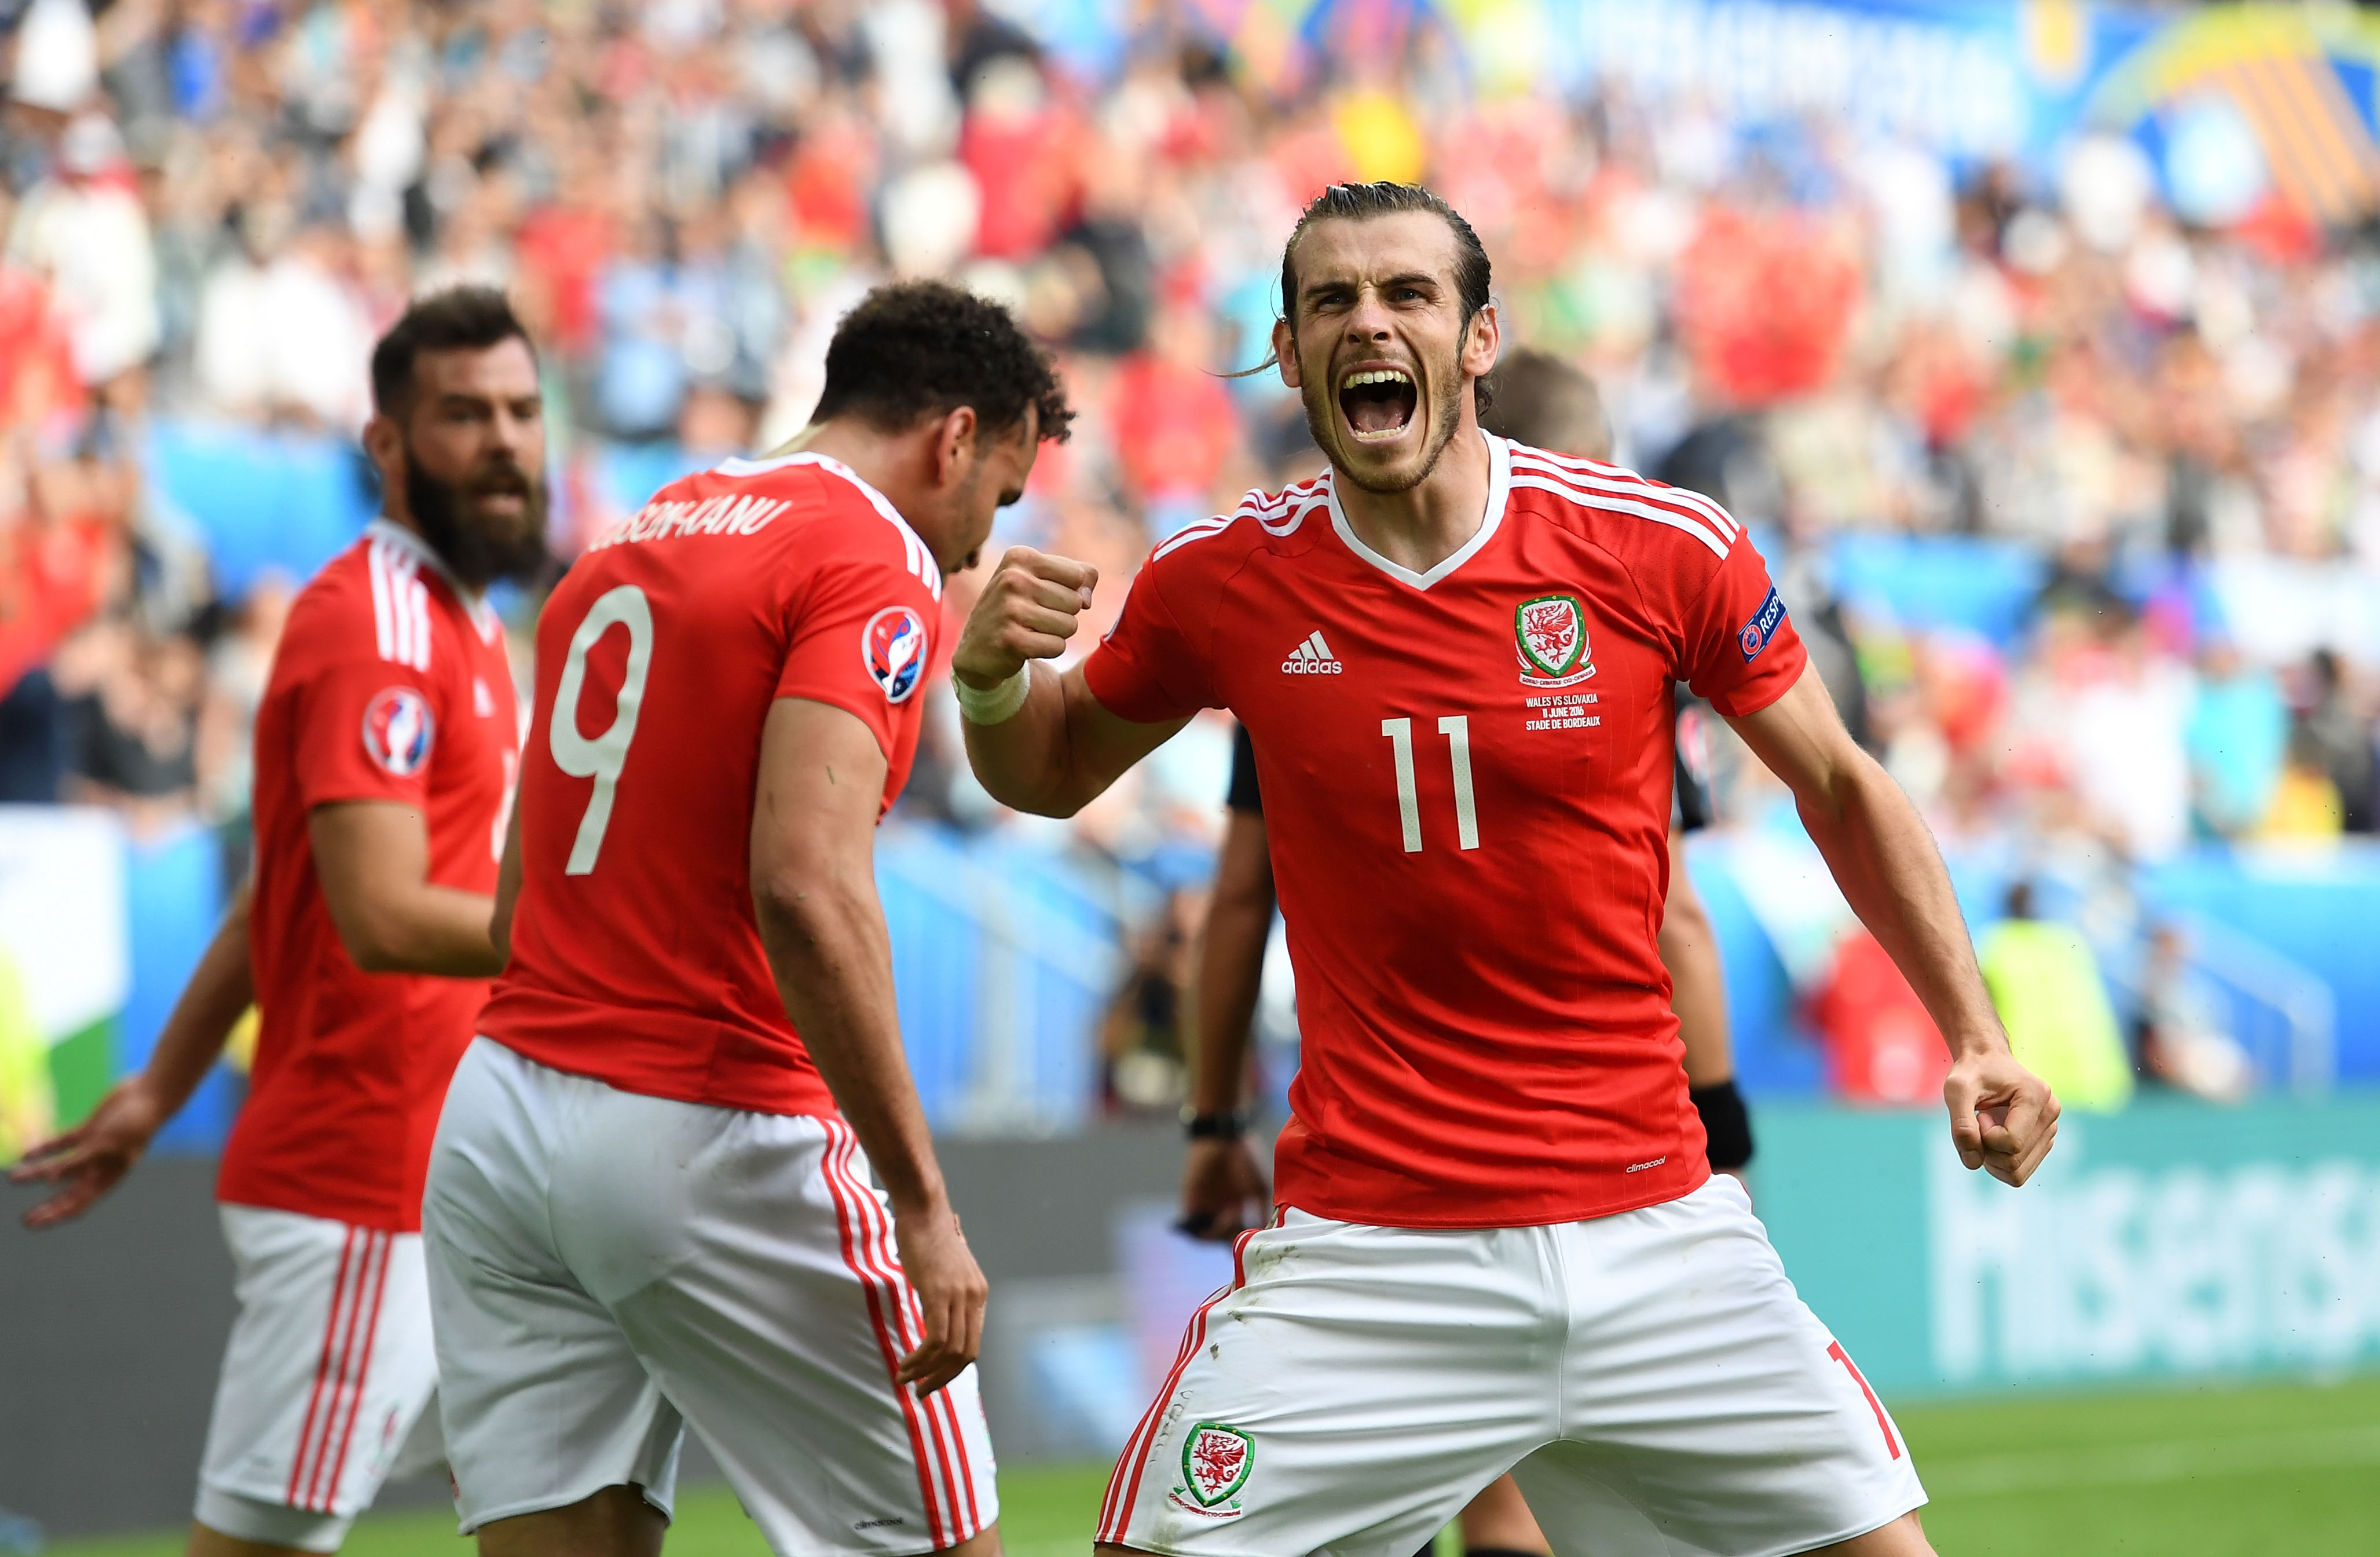 BORDEAUX, FRANCE - JUNE 11: Gareth Bale (R) of Wales celebrates his team's second goal scored by Hal Robson-Kanu (C) during the UEFA EURO 2016 Group B match between Wales and Slovakia at Stade Matmut Atlantique on June 11, 2016 in Bordeaux, France.  (Photo by Stu Forster/Getty Images)